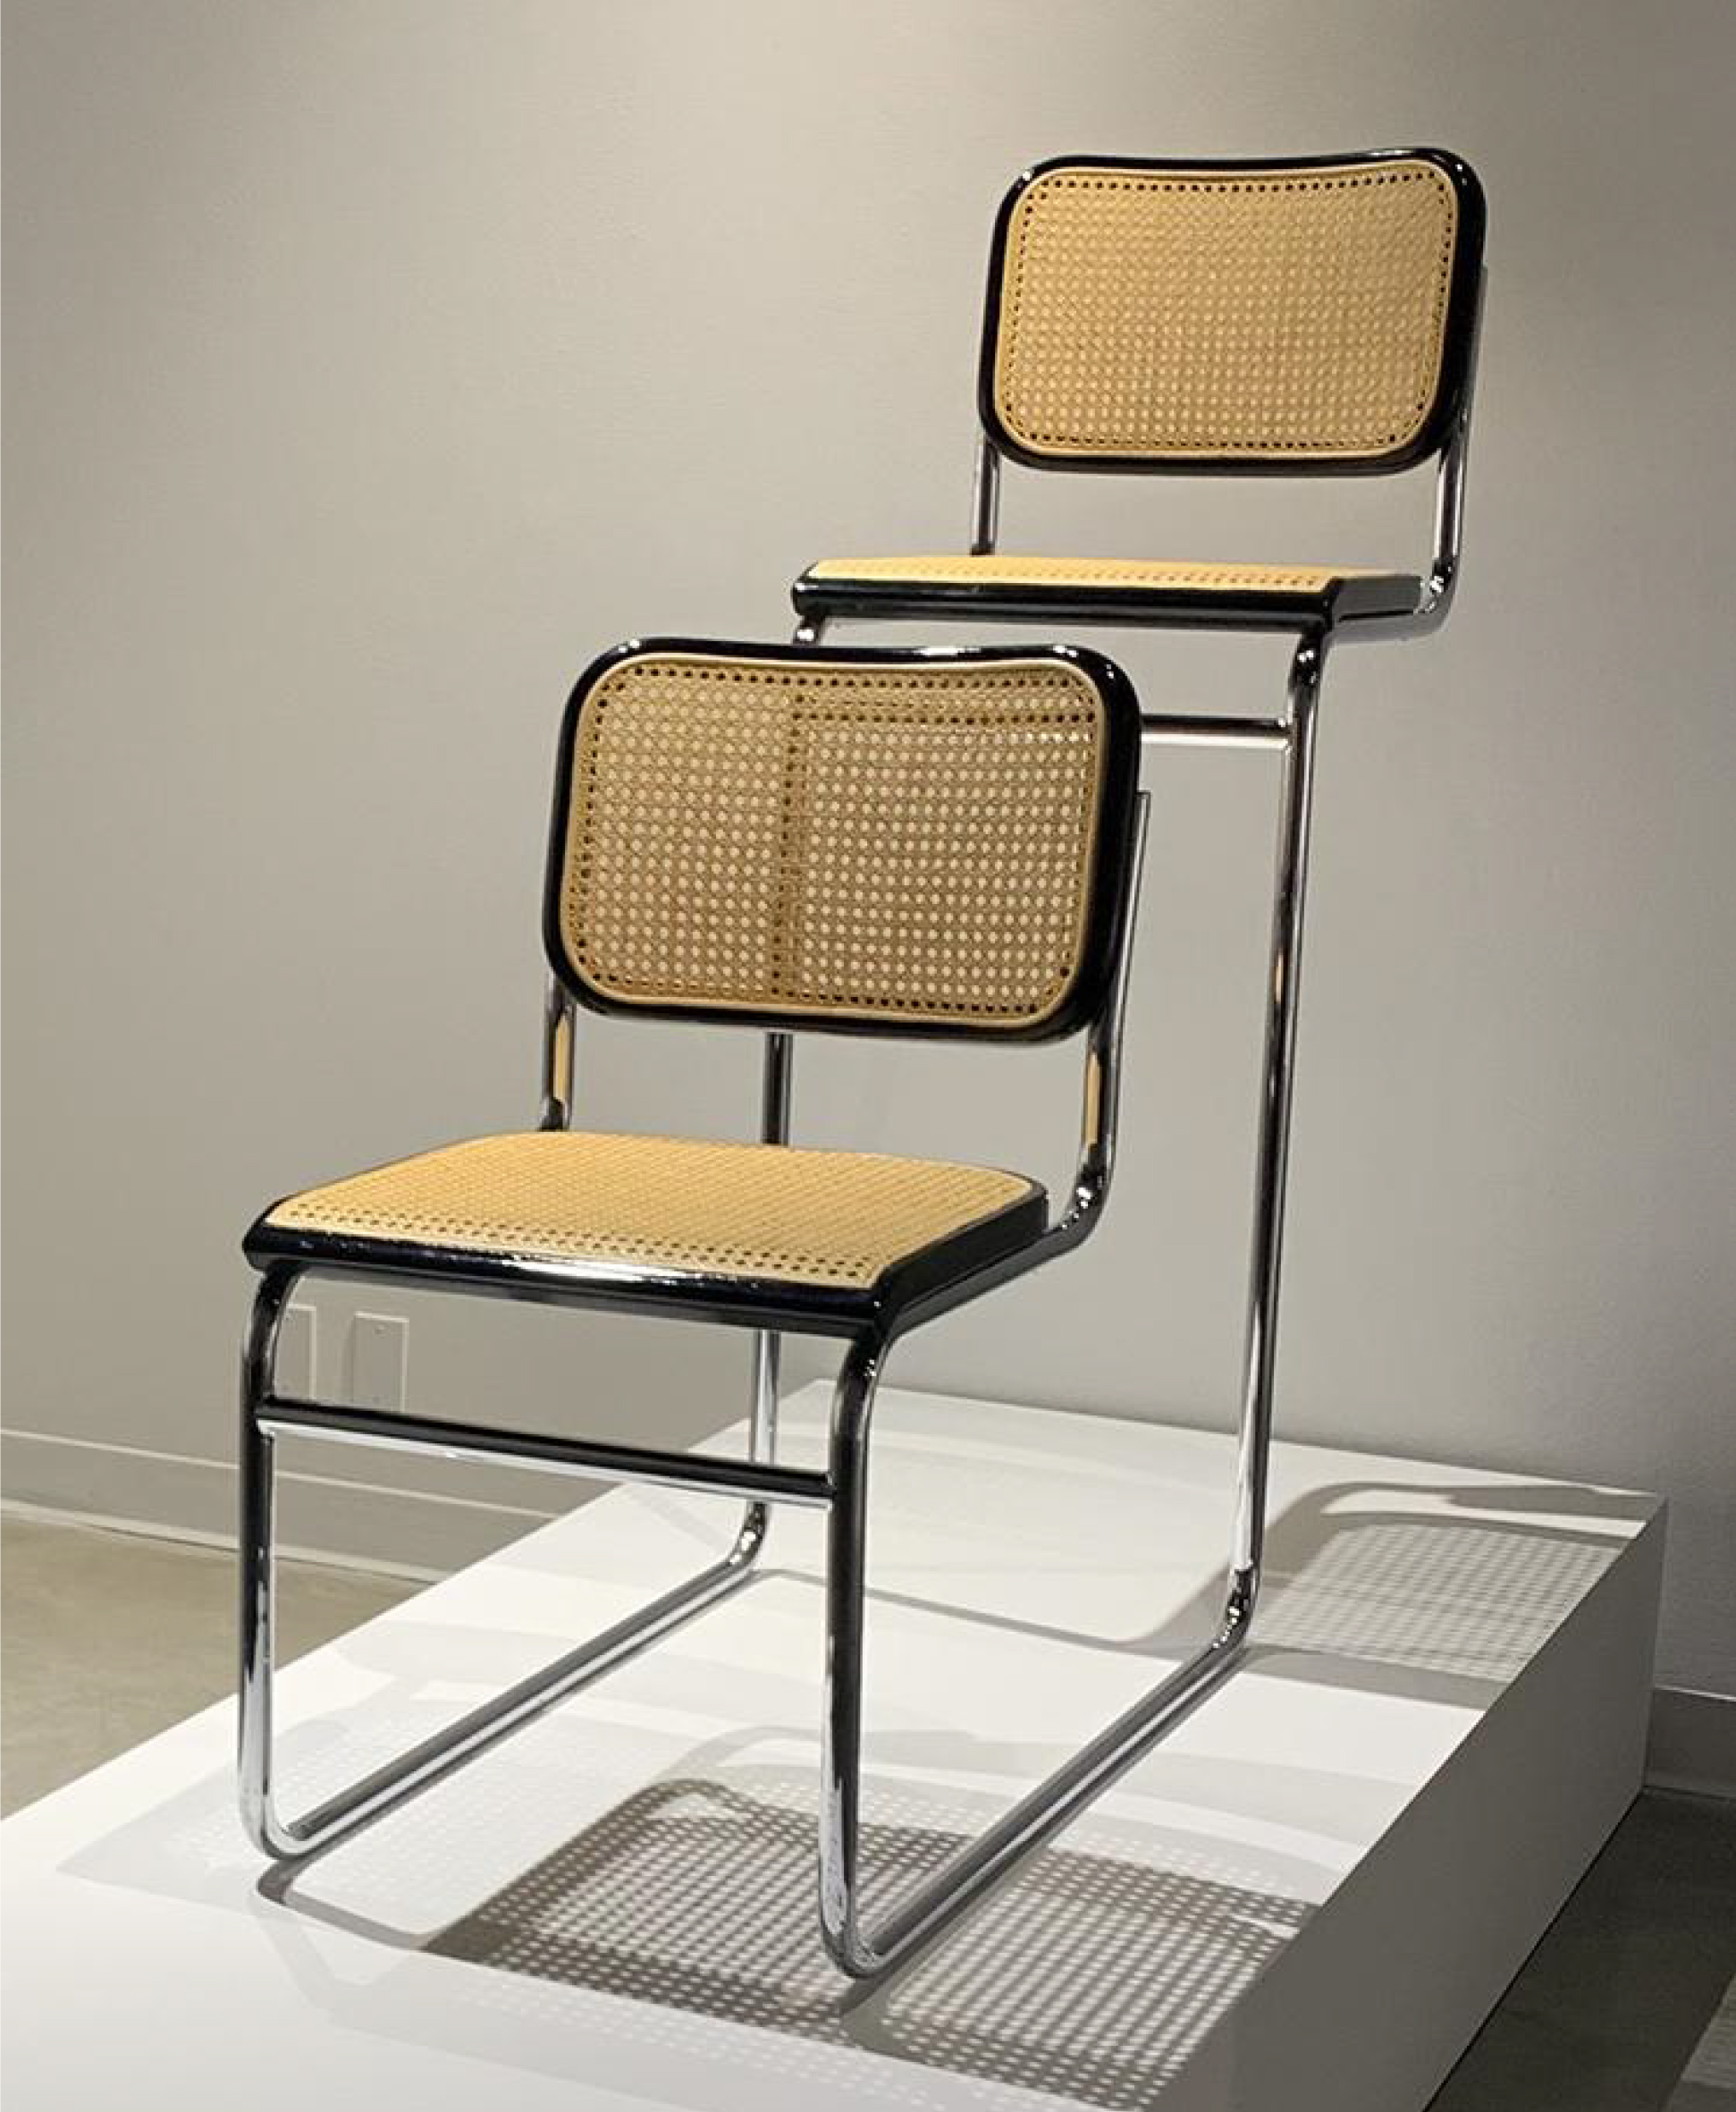 Two cane chairs connect by their chrome legs in a single file line with the chair in the front being smaller and the chair in the back being taller.